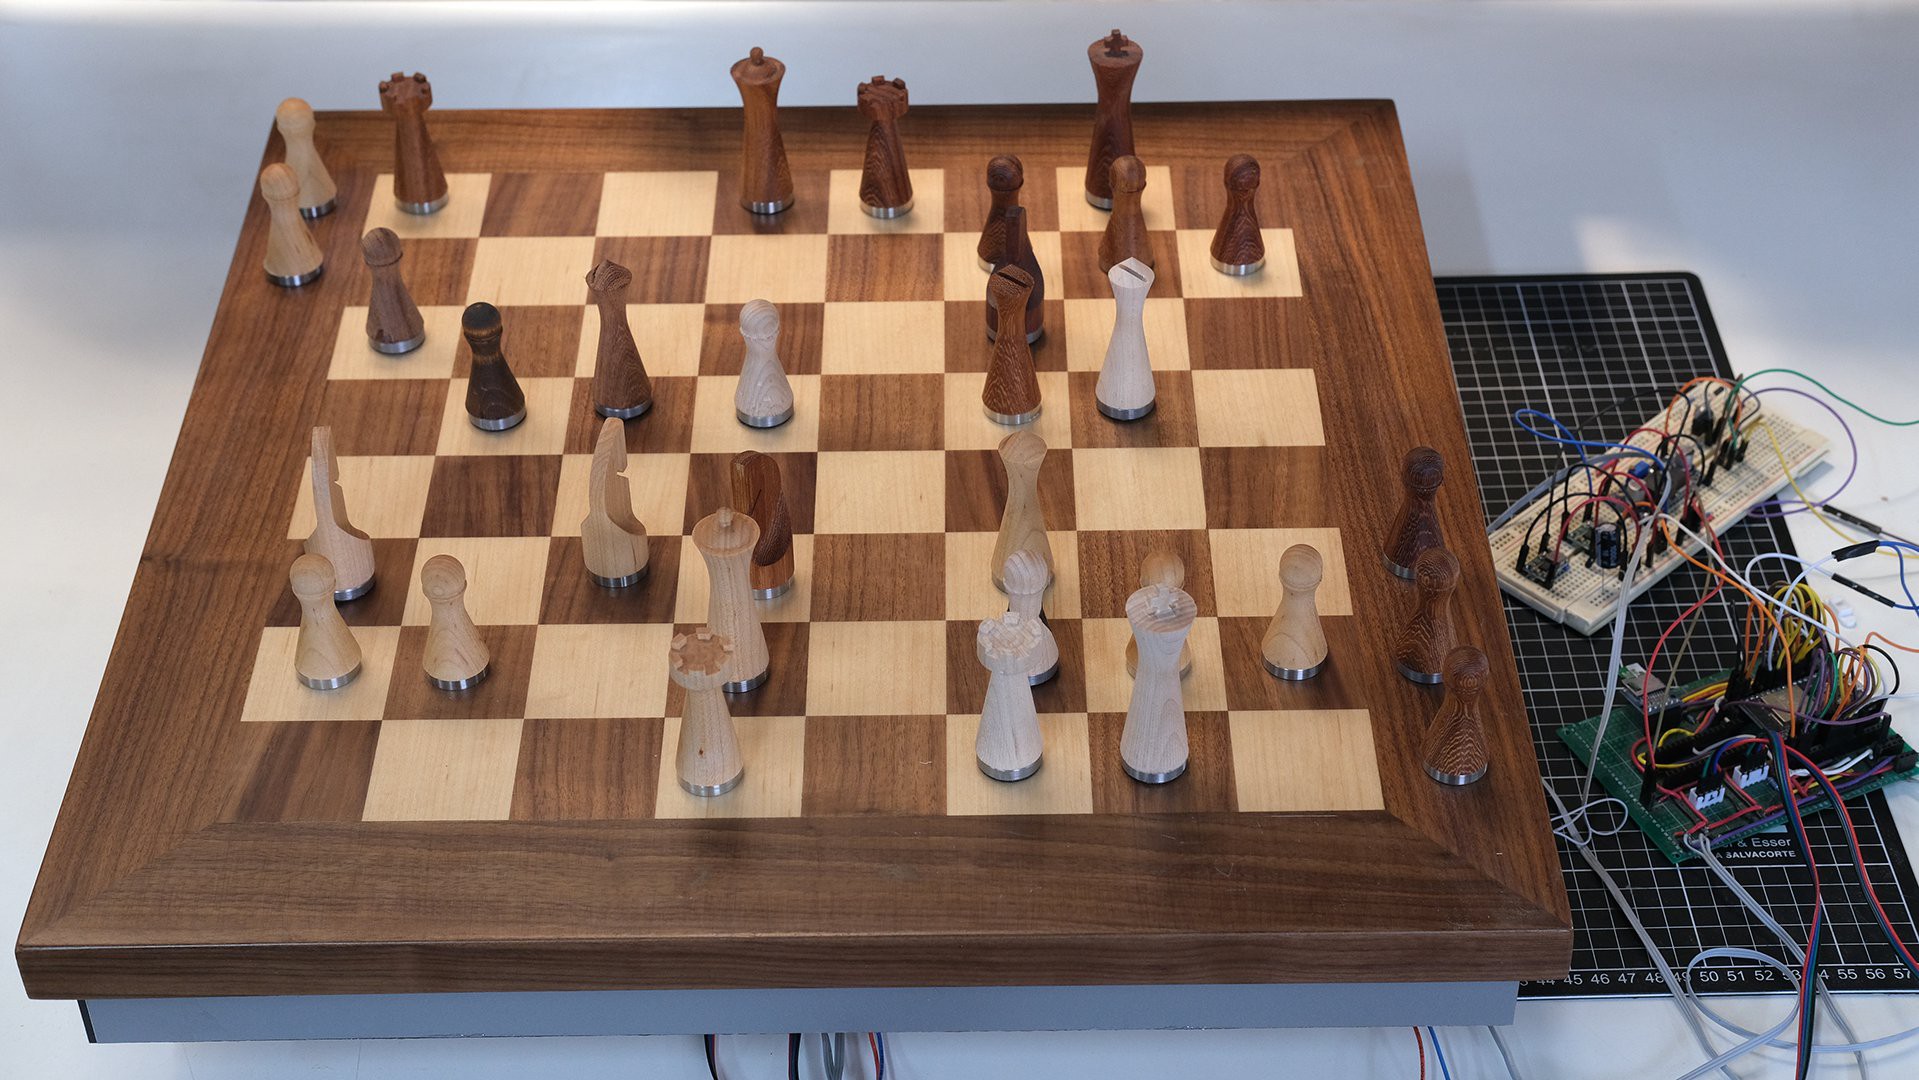 No opponent nearby? Not a problem! This automatic chessboard lets